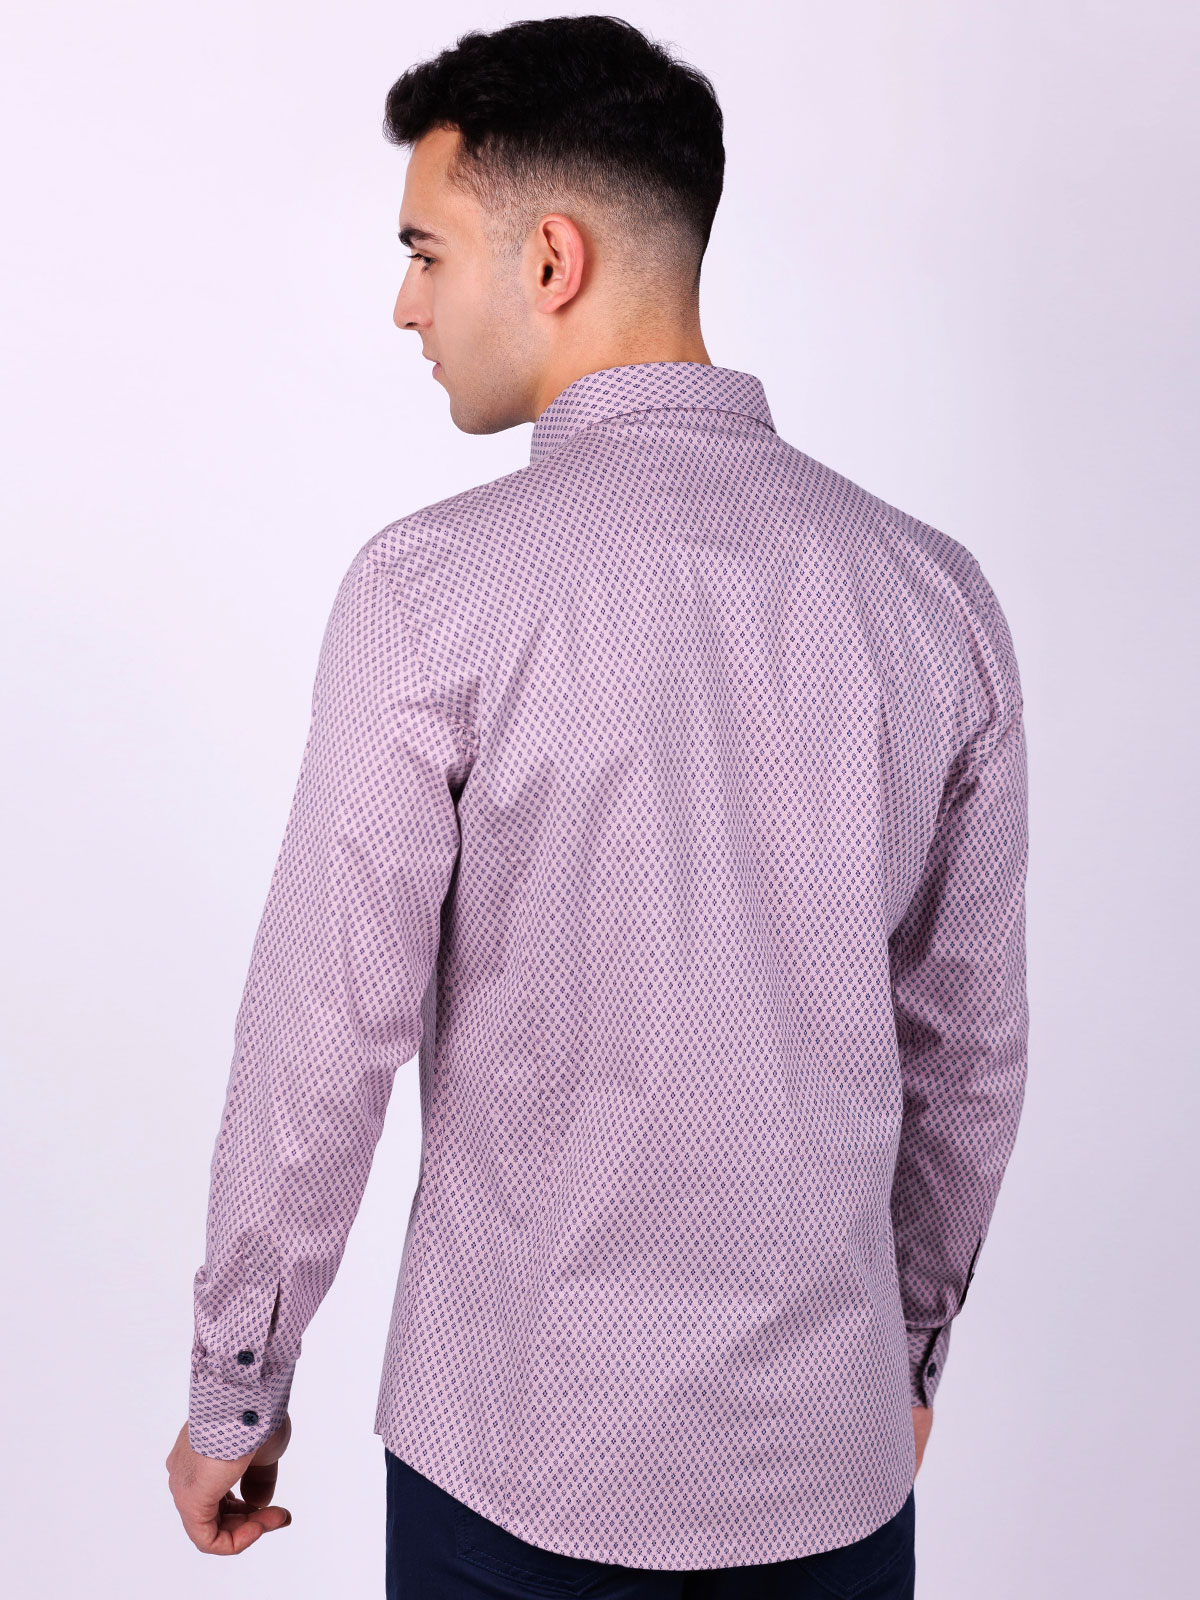 Shirt in light purple with figures - 21538 € 33.18 img4